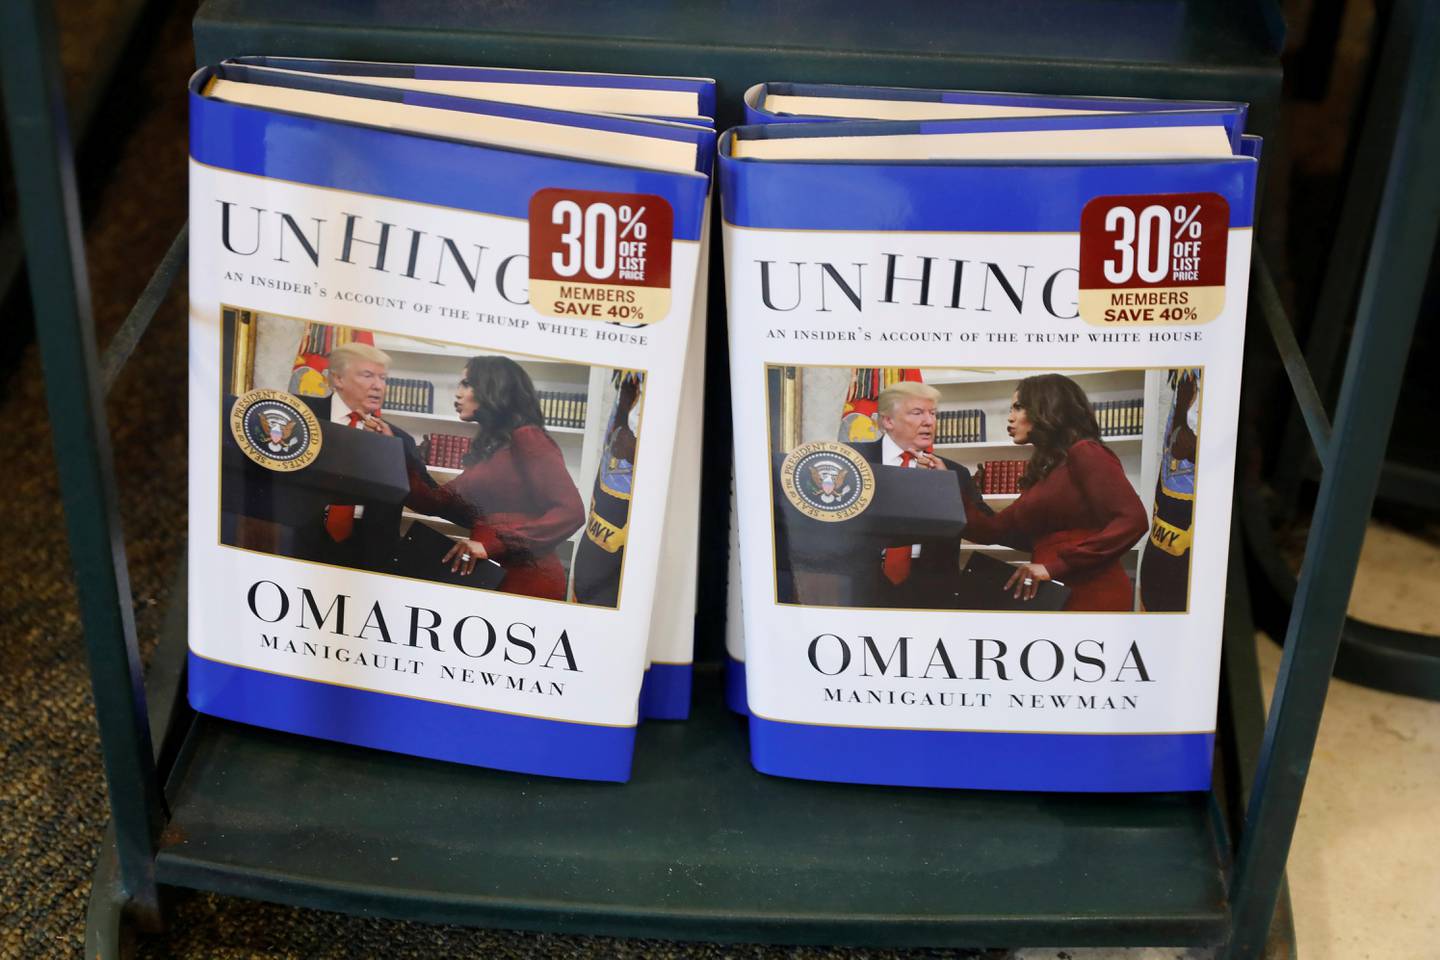 The book "Unhinged" by former White House staffer Omarosa Manigault Newman on her time in the White House administration is seen for sale in Manhattan, New York, U.S., August 14, 2018.  REUTERS/Shannon Stapleton   NO RESALES. NO ARCHIVES